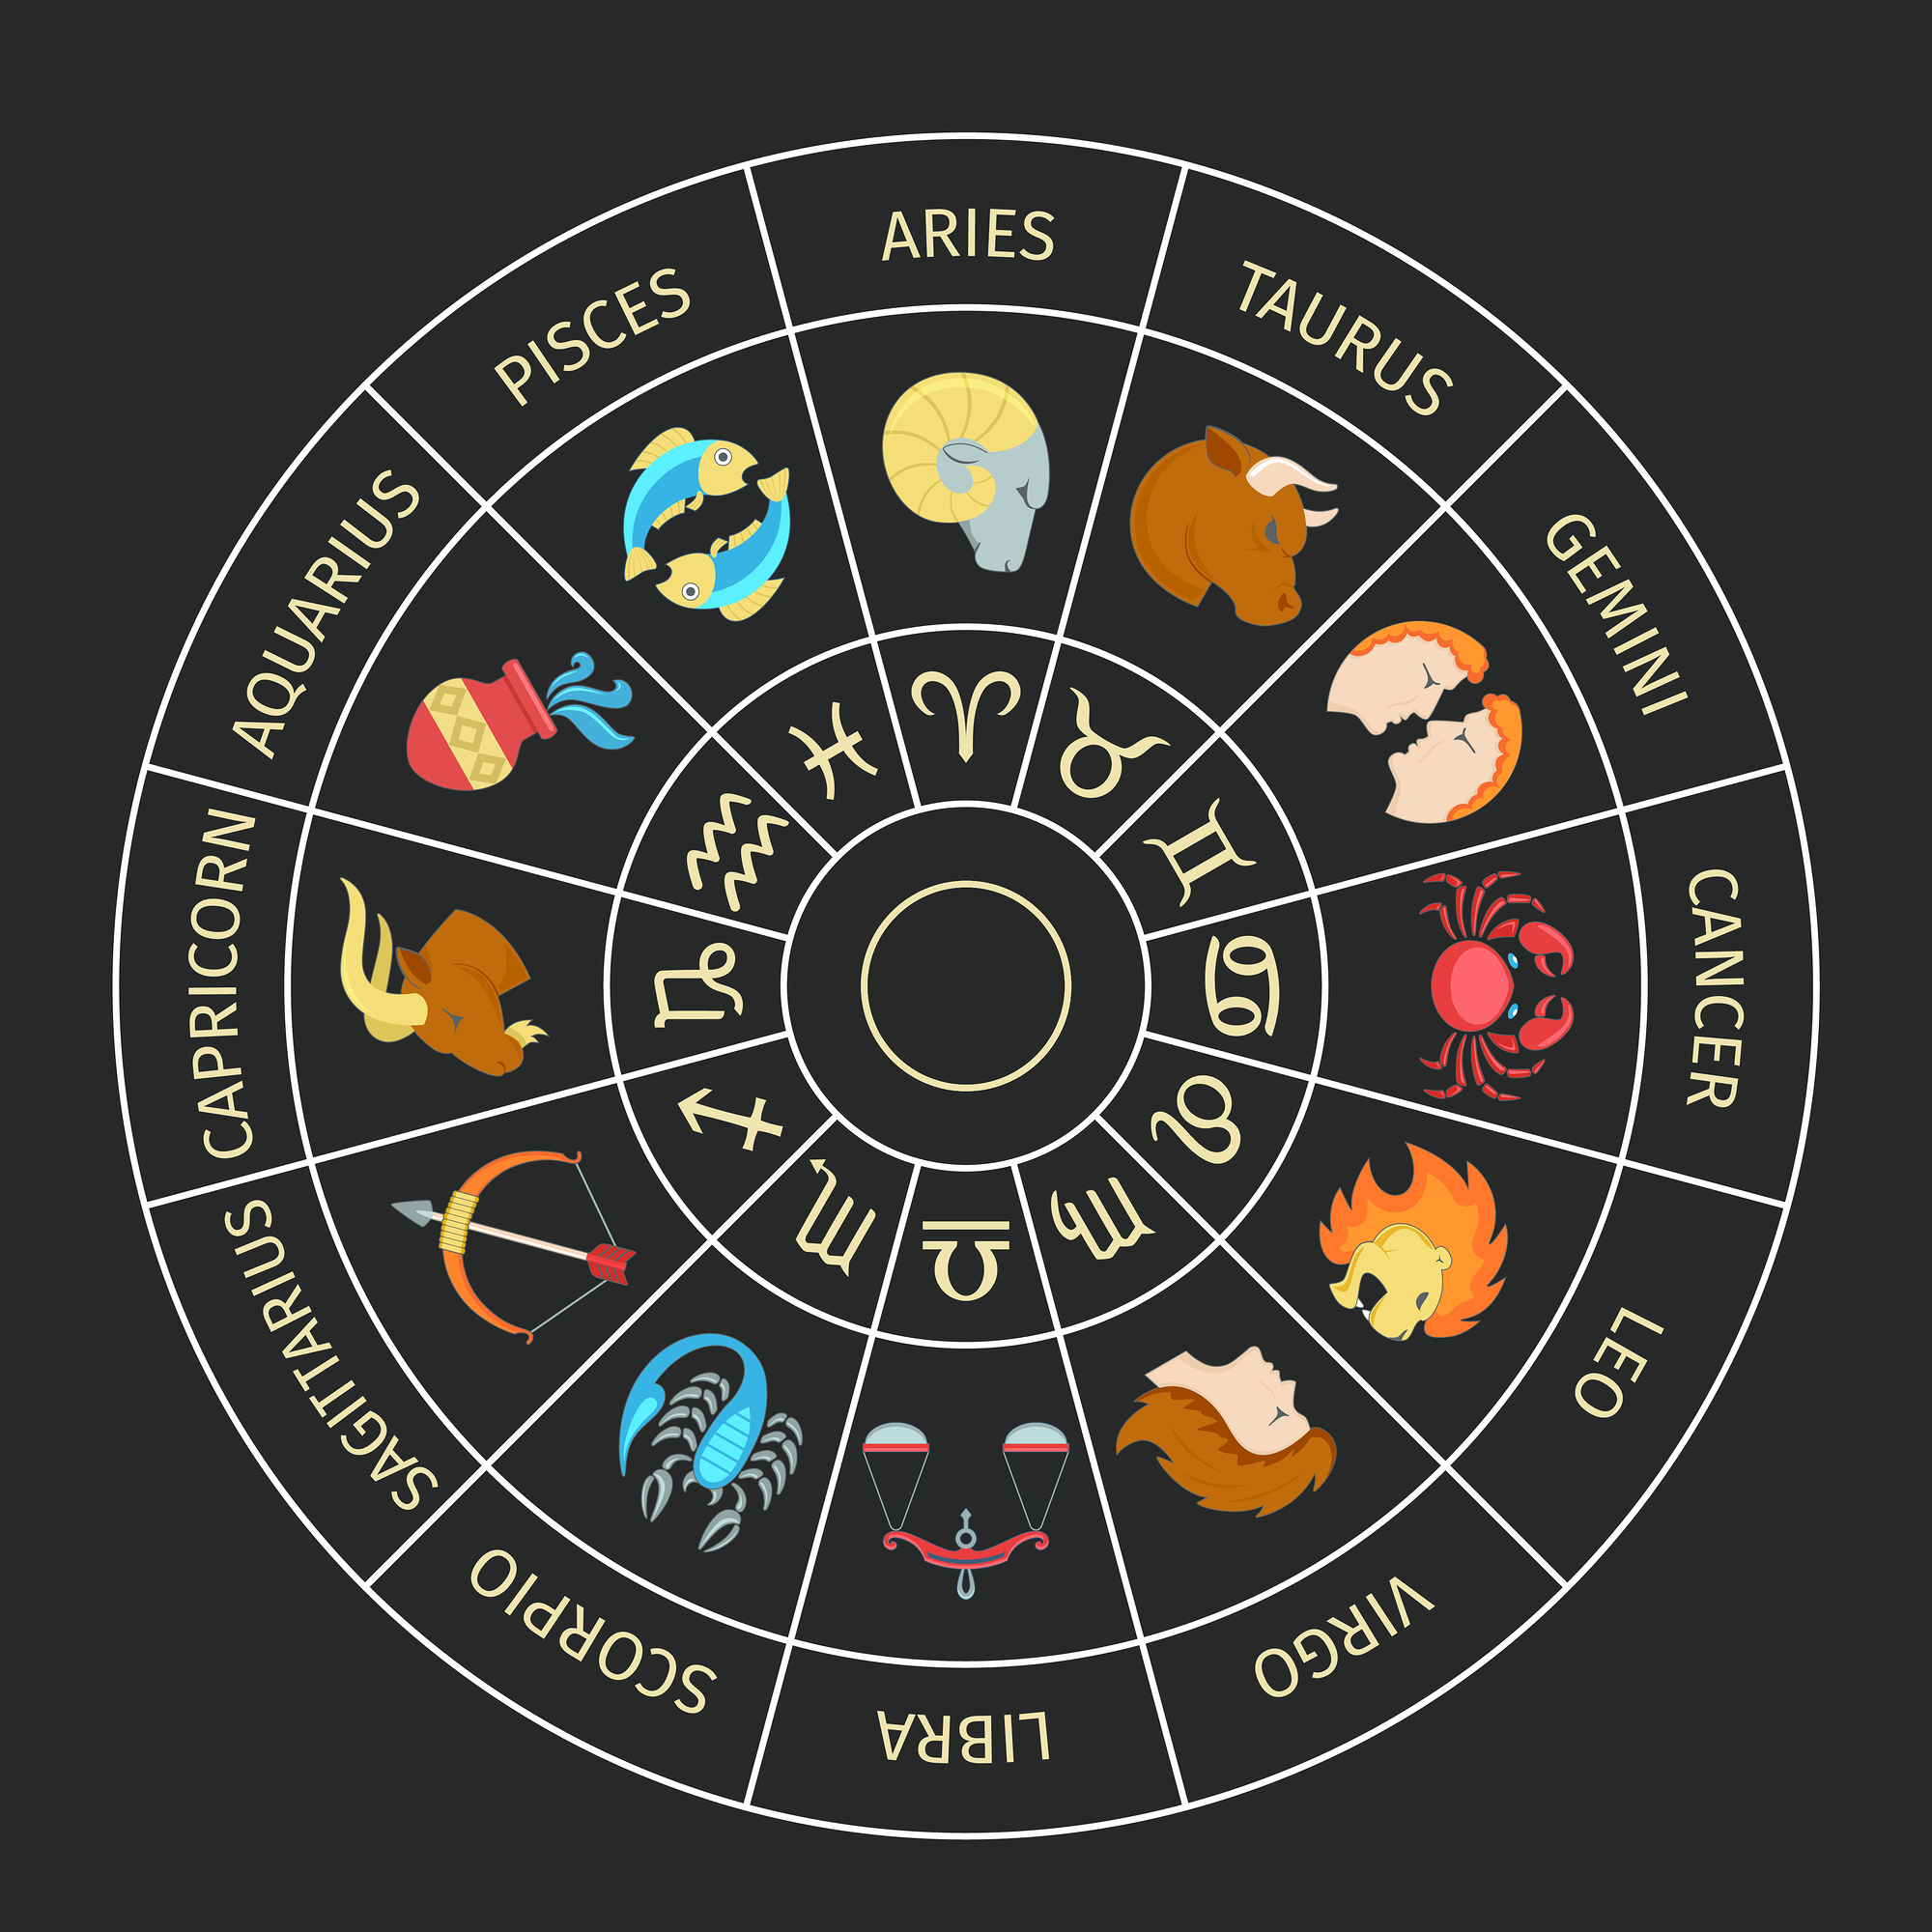 Free Horoscope Pics, Download Free Horoscope Pics png images, Free ...